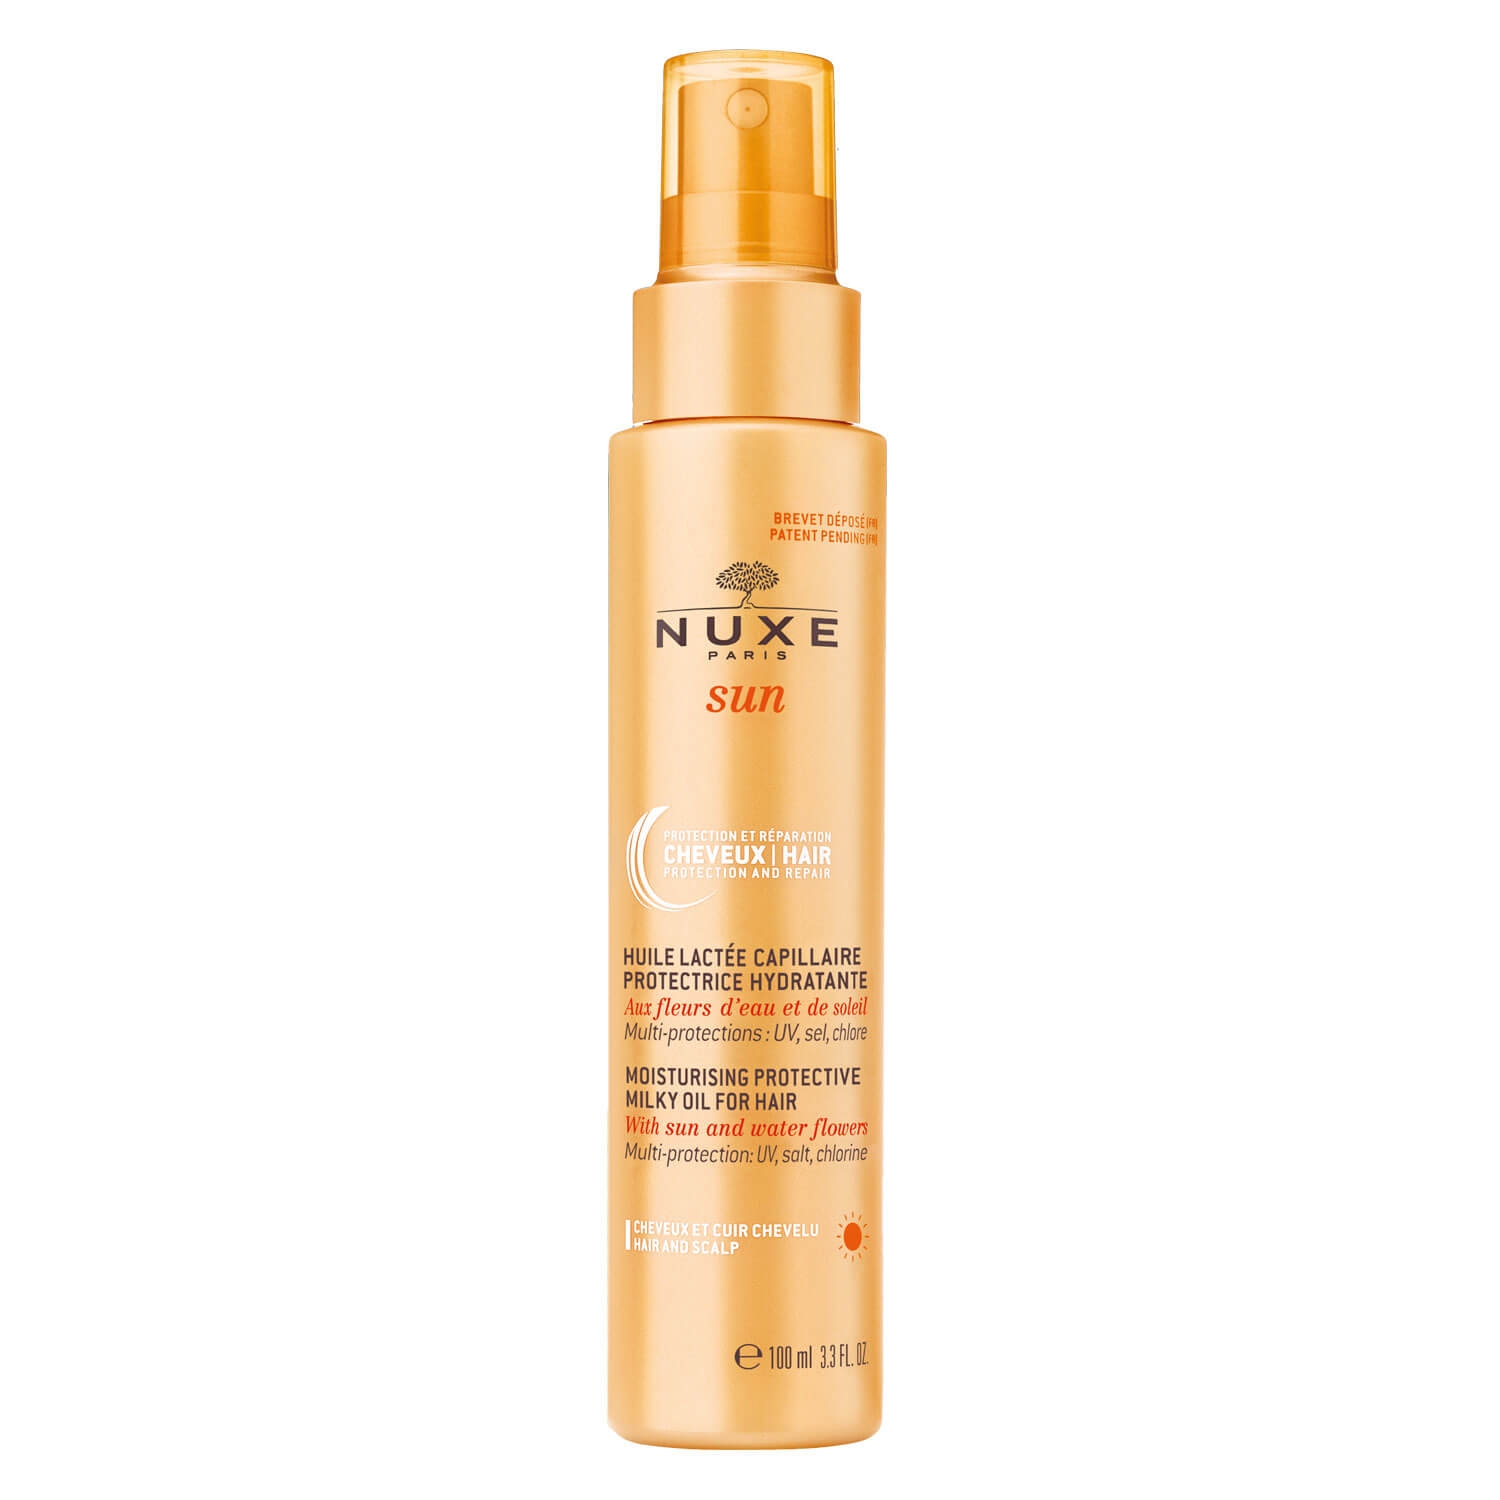 Product image from Nuxe Sun - Huile Lactée Capillaire Protectrice Hydratante